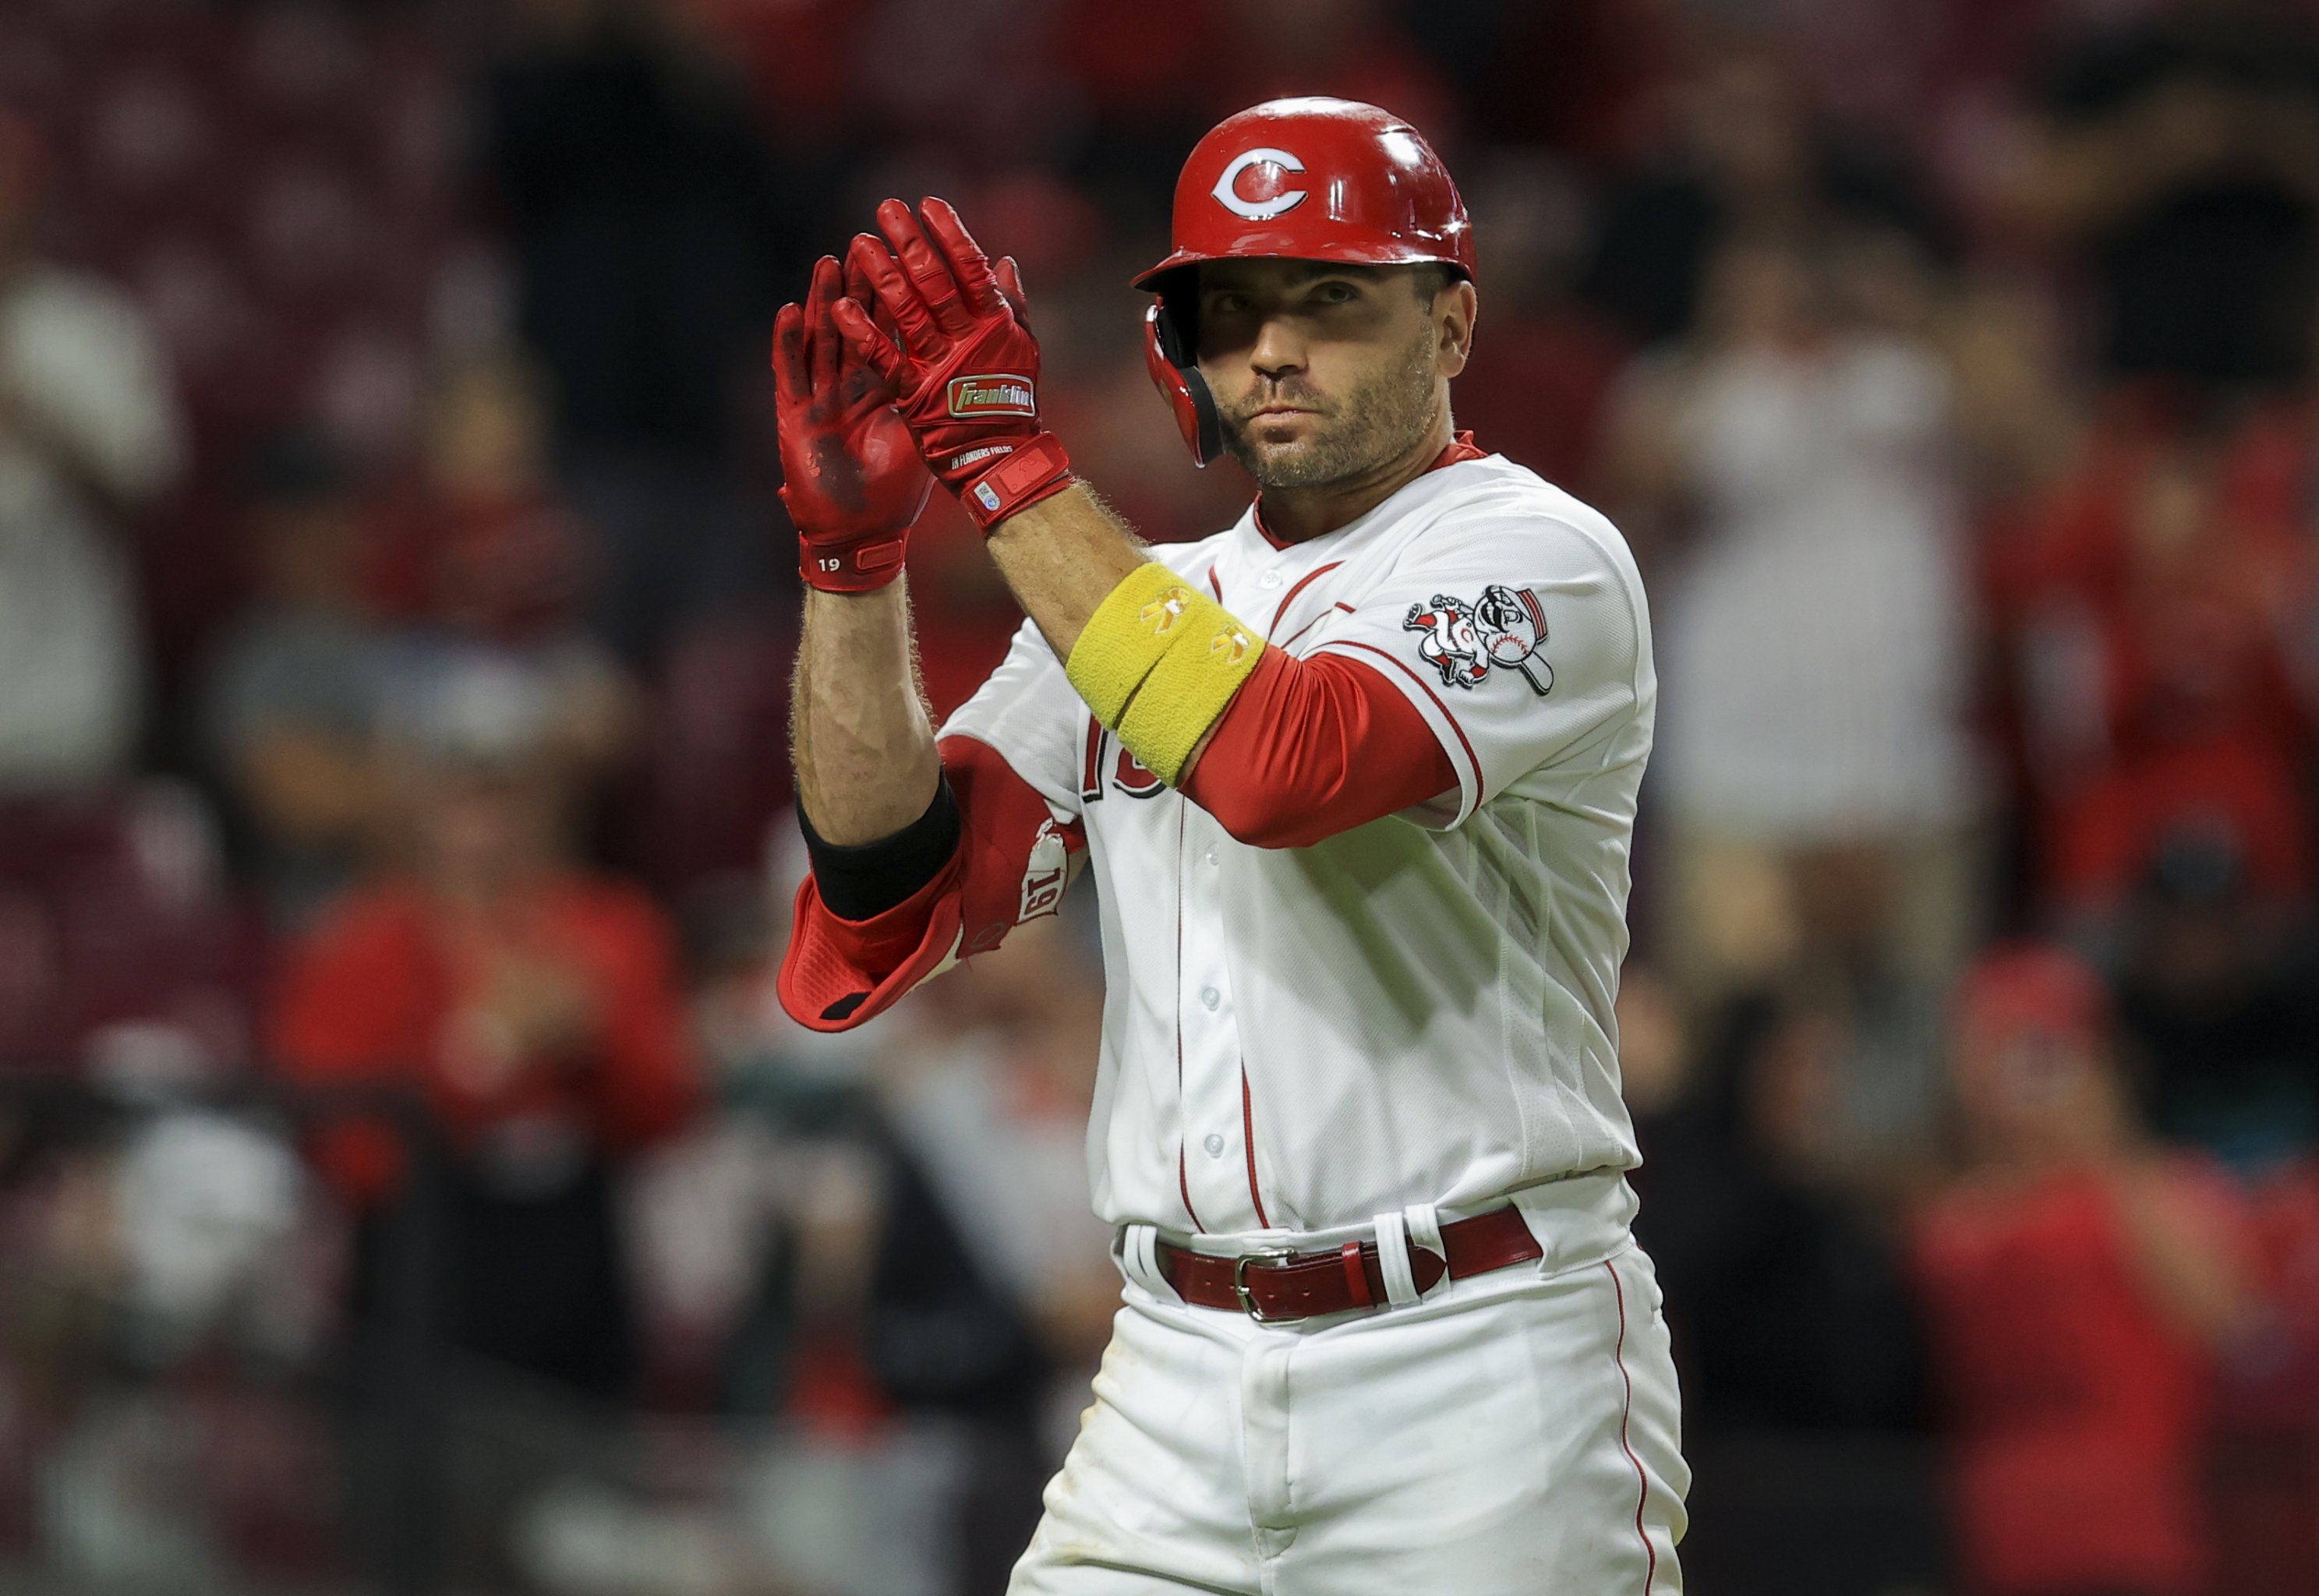 Cost-Cutting Cincinnati Reds 'Must Align Our Payroll To Our Resources